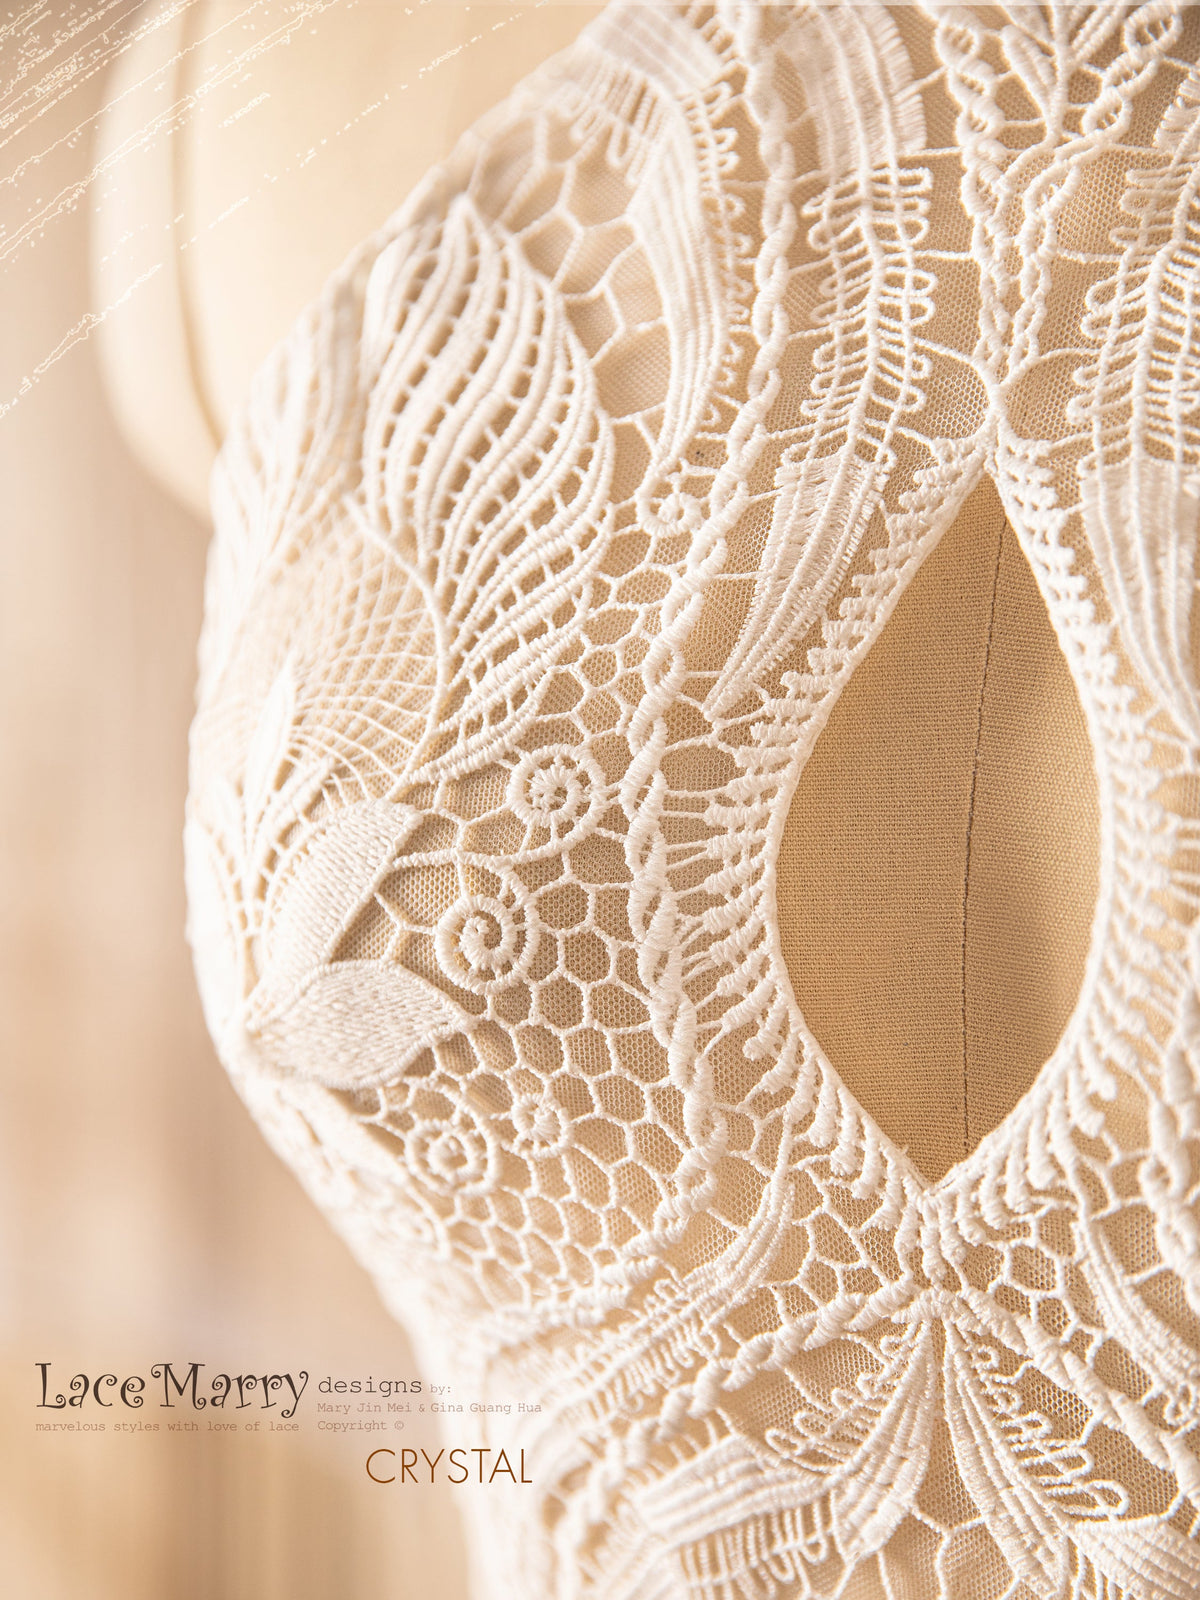 CRYSTAL / Bridal Boho Lace Top from Macrame Lace